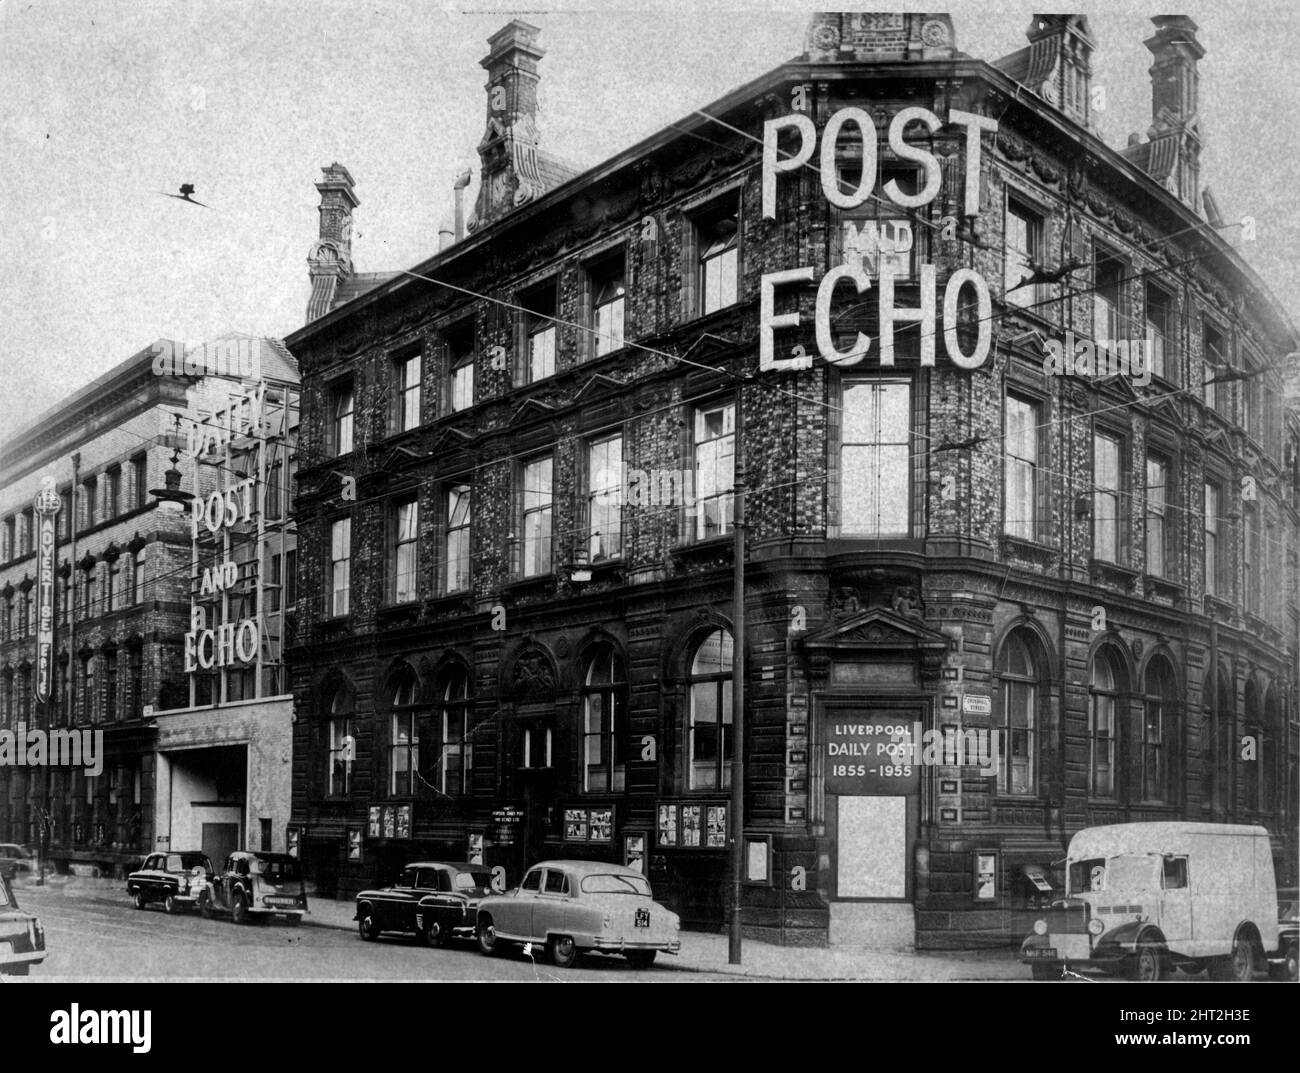 The original Liverpool Post and Echo Newspaper Building in Liverpool, England. This building was knocked down and a new  Liverpool Post and Echo Newspaper Building was opened in 1974, at 95 Old Hall Road, Liverpool.  Picture taken circa 1st January 1966 Stock Photo